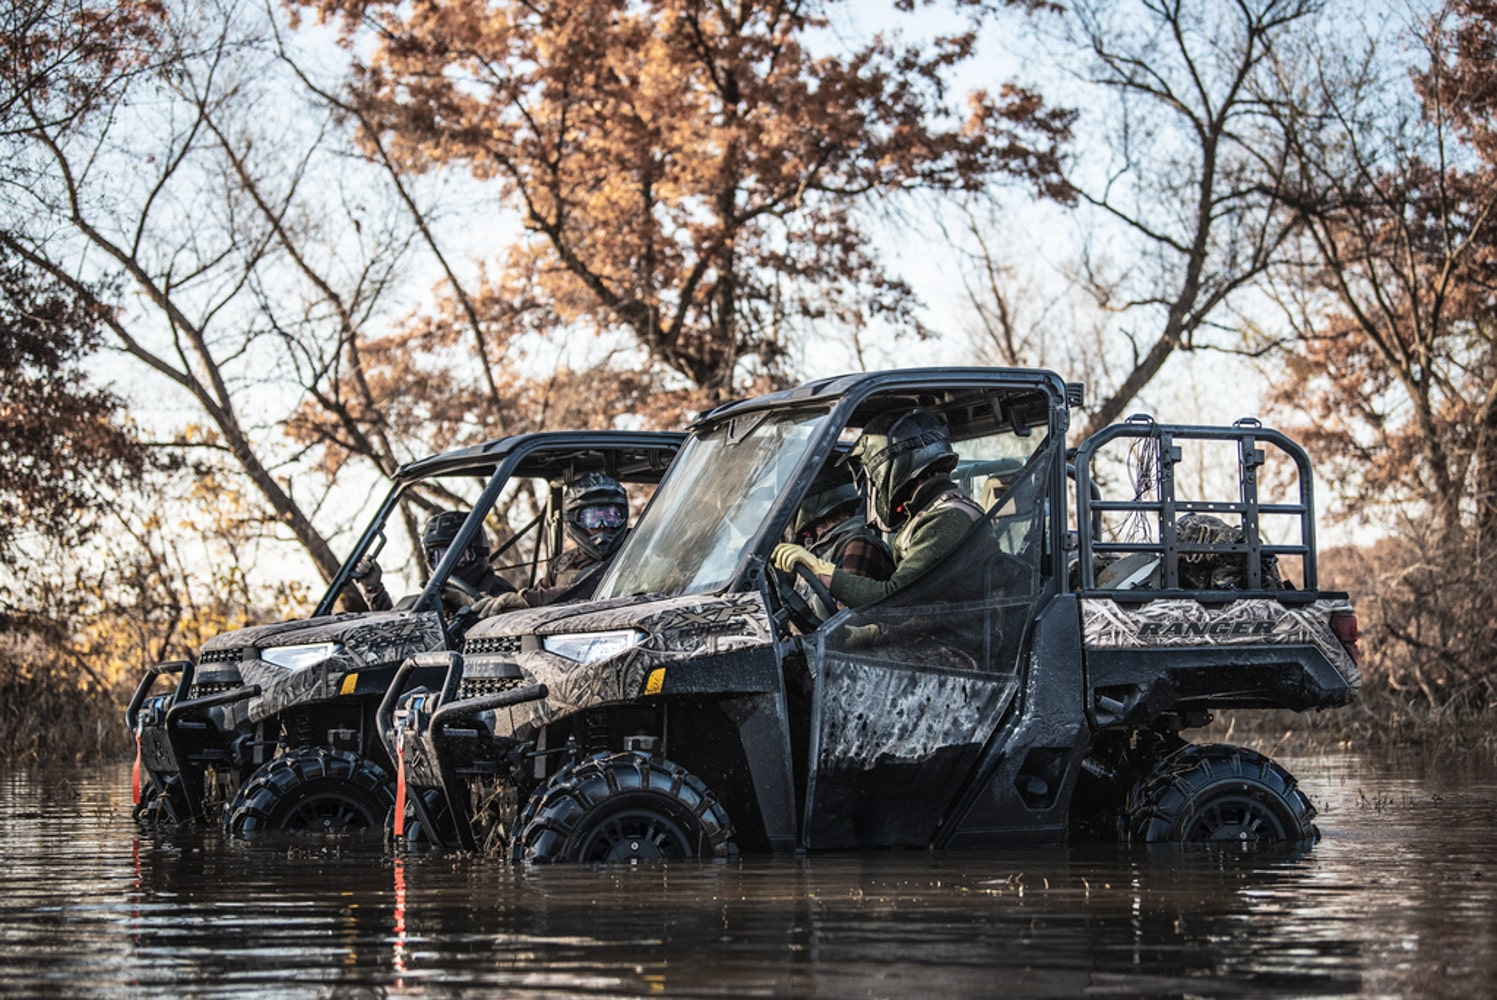 New limited editions of RANGER, Sportsman, Scrambler, and RZR for 2022